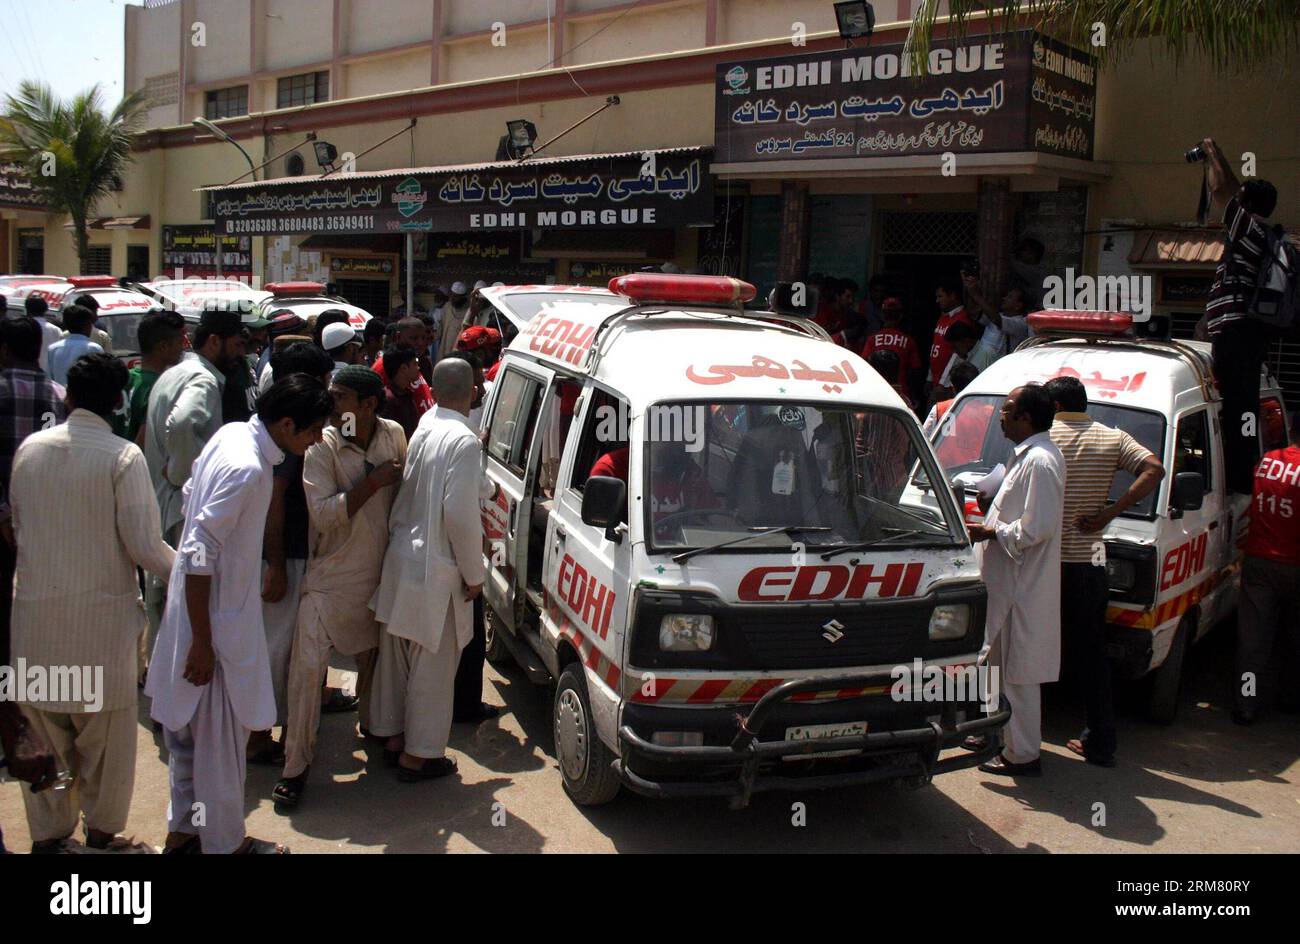 (140322) -- KARACHI, March 22, 2014 (Xinhua) -- Ambulances carrying bodies of victims arrive at a hospital in southern Pakistani port city of Karachi , March 22, 2014. At least 40 people were killed and many others injured when two passenger vans rammed into an oil tanker in southwestern Pakistan on Saturday morning, local media reported. (Xinhua/Arshad)(ctt) PAKISTAN-KARACHI-ROAD ACCIDENT PUBLICATIONxNOTxINxCHN   Karachi March 22 2014 XINHUA ambulances carrying Bodies of Victims Arrive AT a Hospital in Southern Pakistani Port City of Karachi March 22 2014 AT least 40 Celebrities Were KILLED a Stock Photo